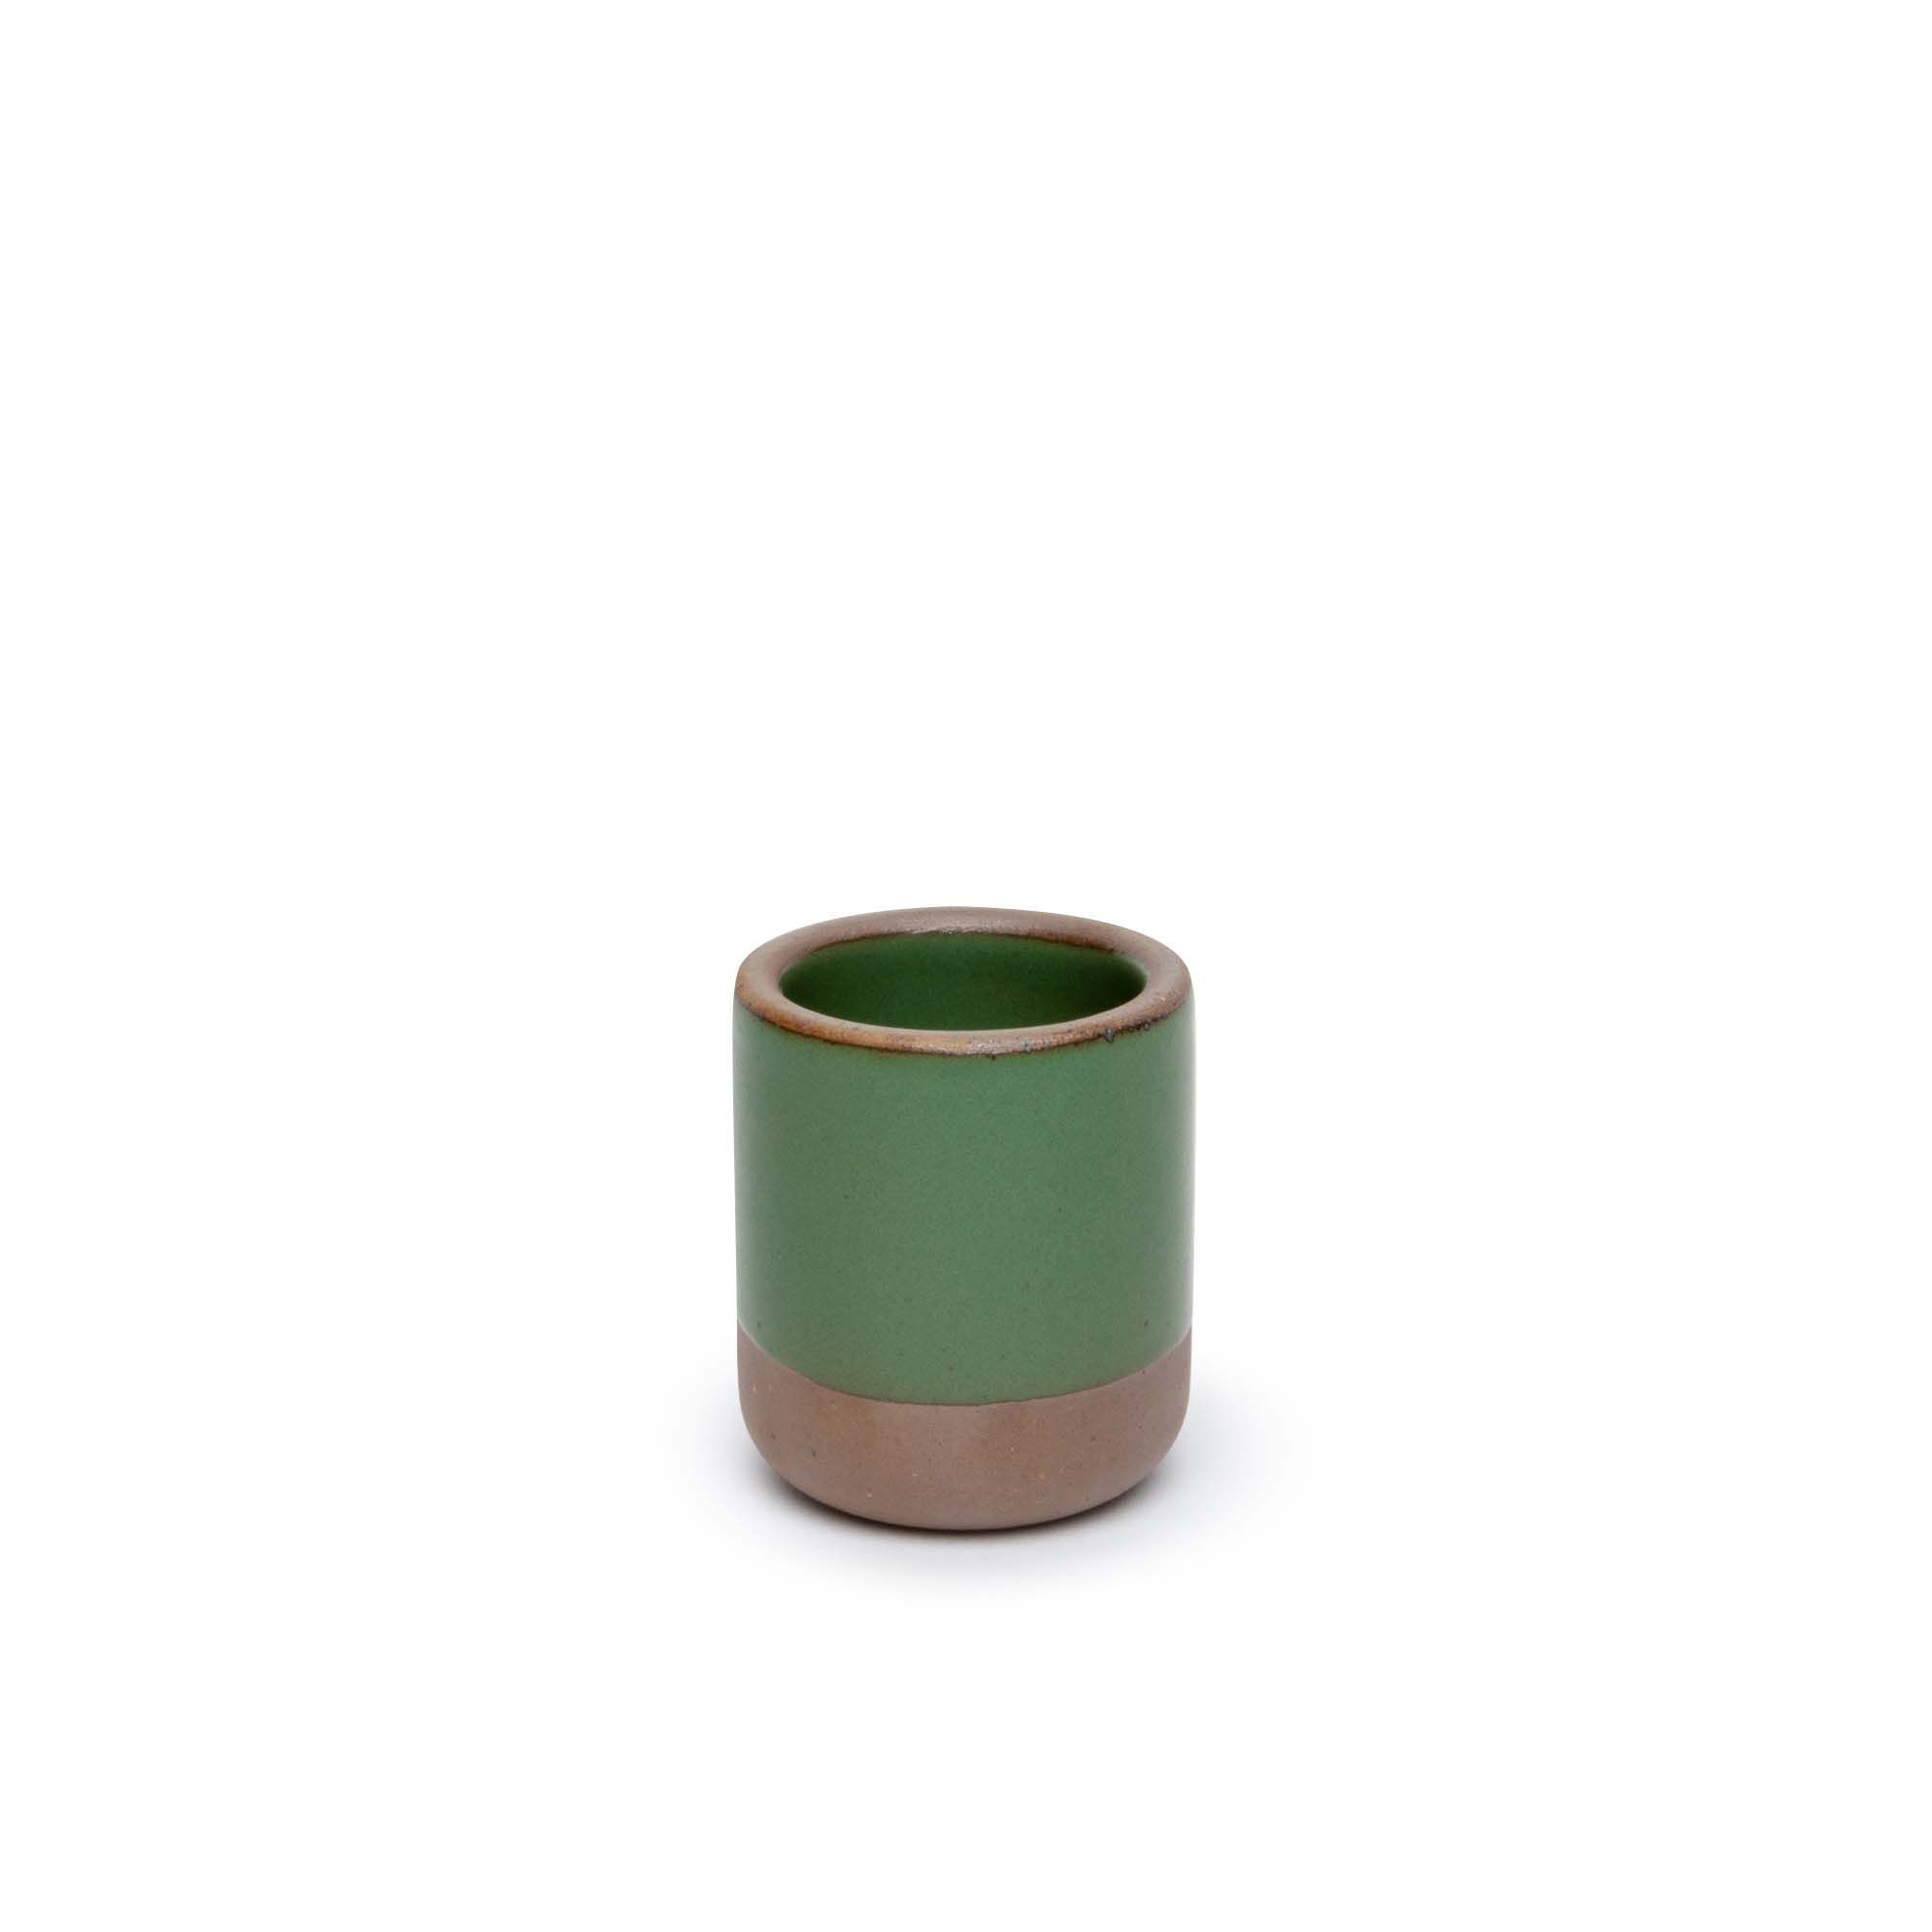 A small, short ceramic mug cup in a deep, verdant green color featuring iron speckles and unglazed rim and bottom base.